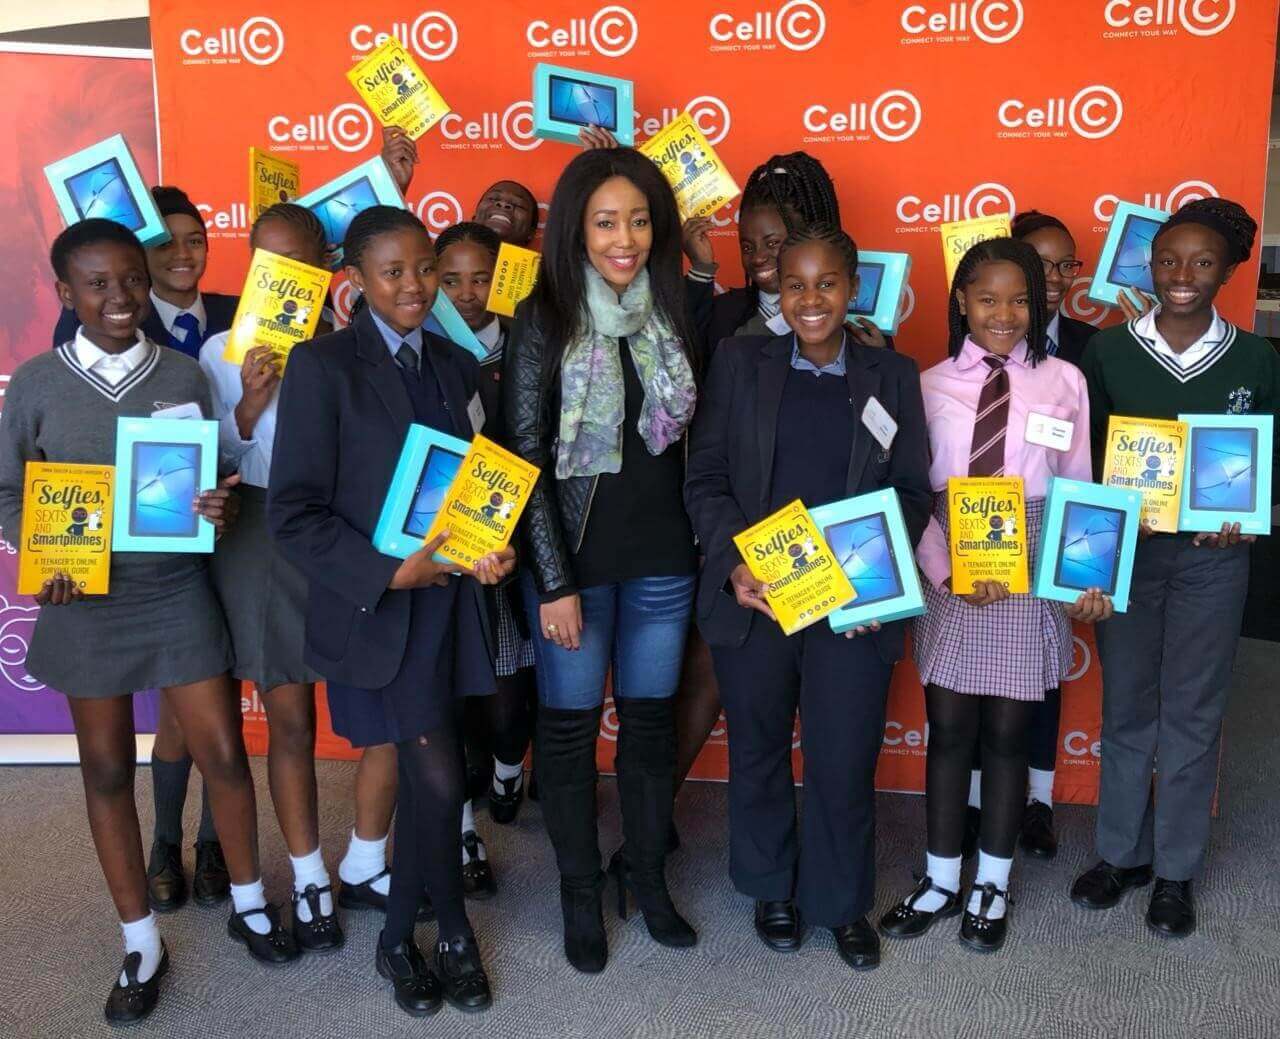 Juliet Mhango Cell C’s Chief Human Capital Development and Transformation Officer With the girls